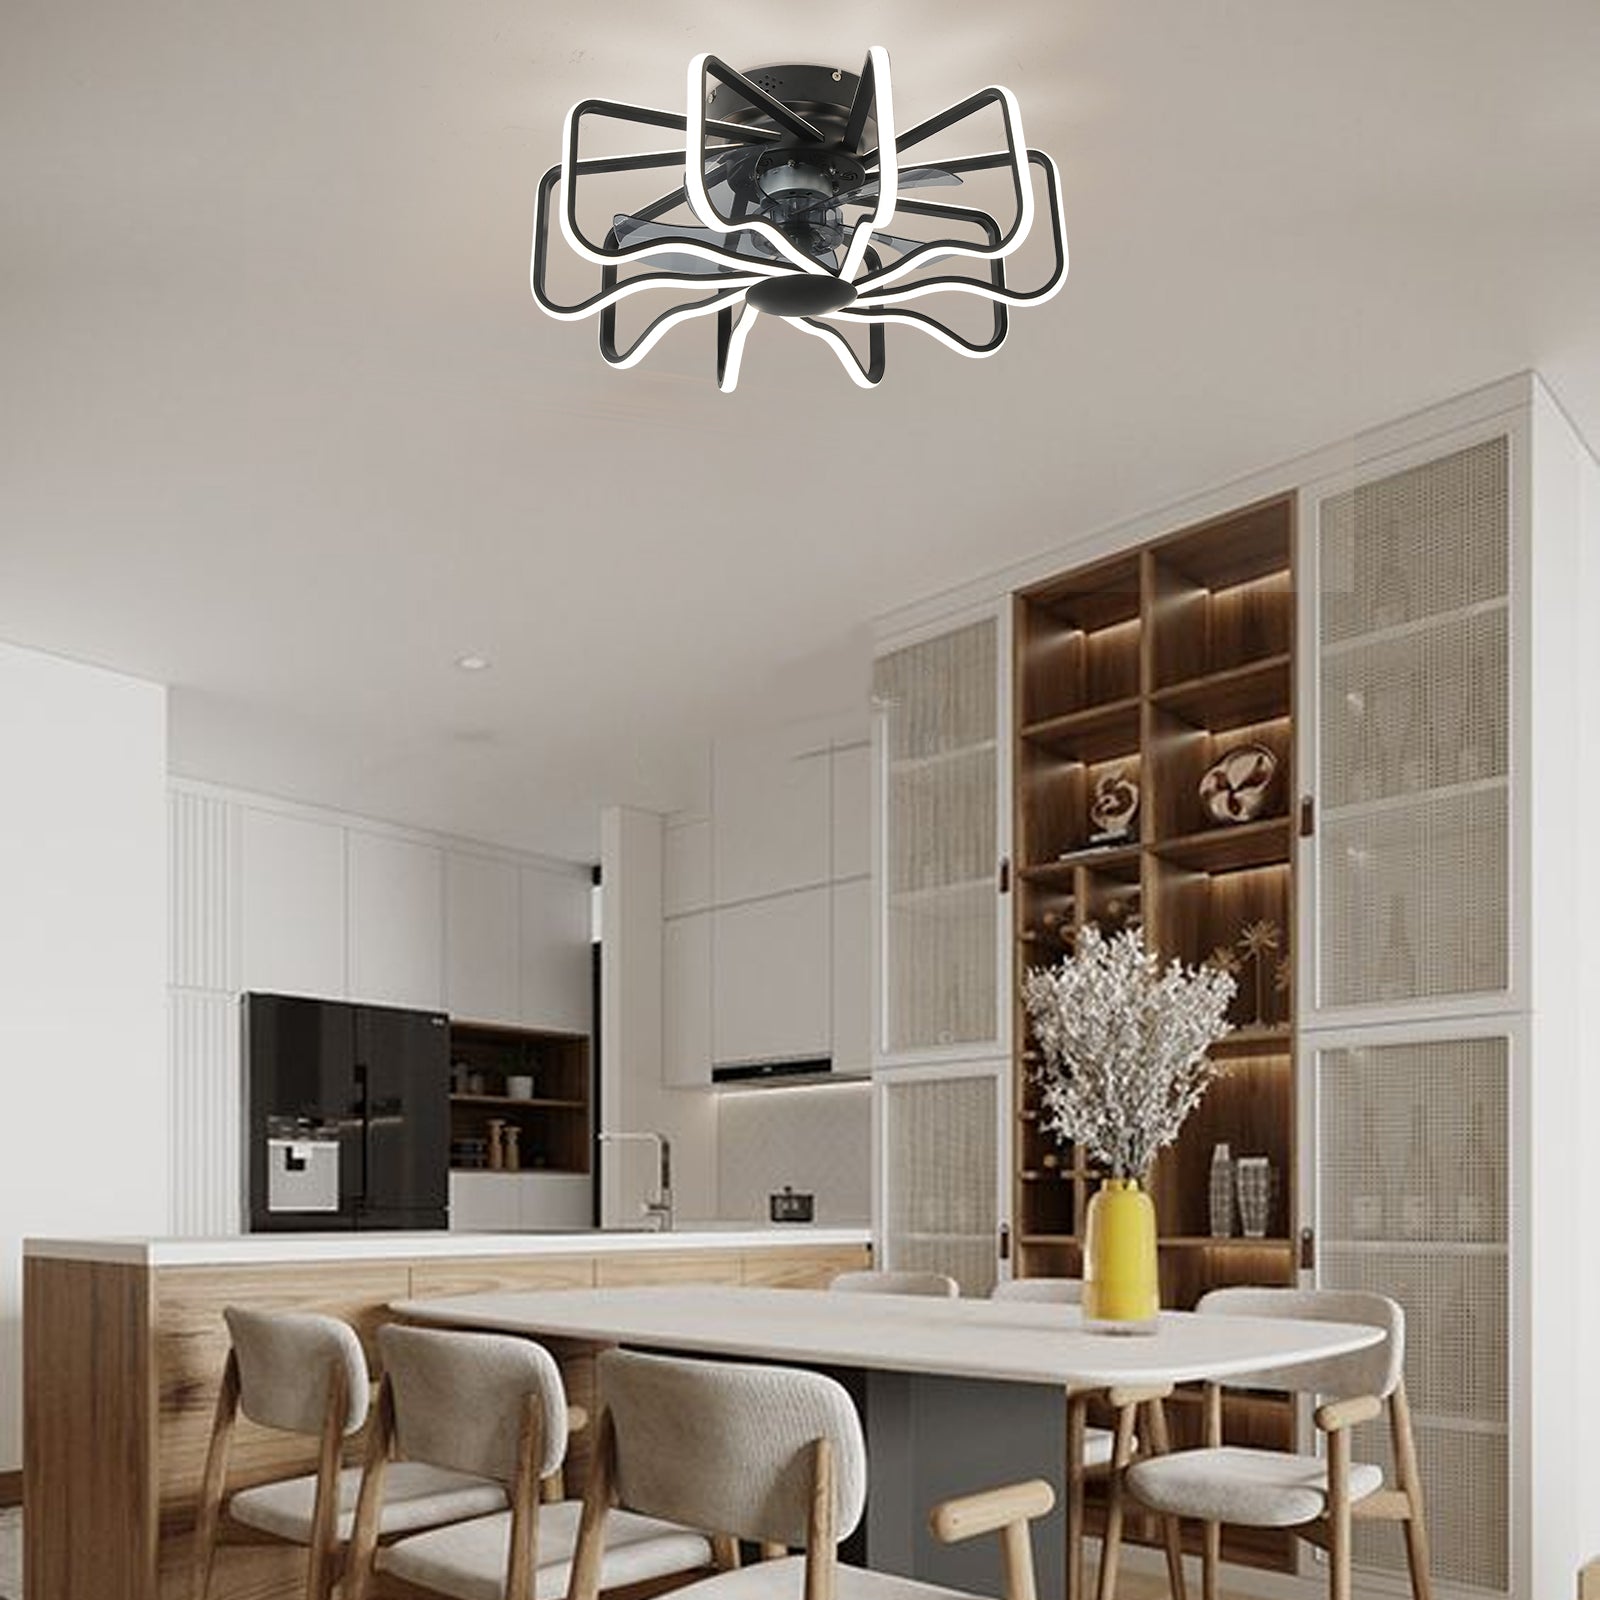 Callan Black eiling Fans with Lights and Remote, Flush Mount Ceiling Fan, Dimmable 3 Color